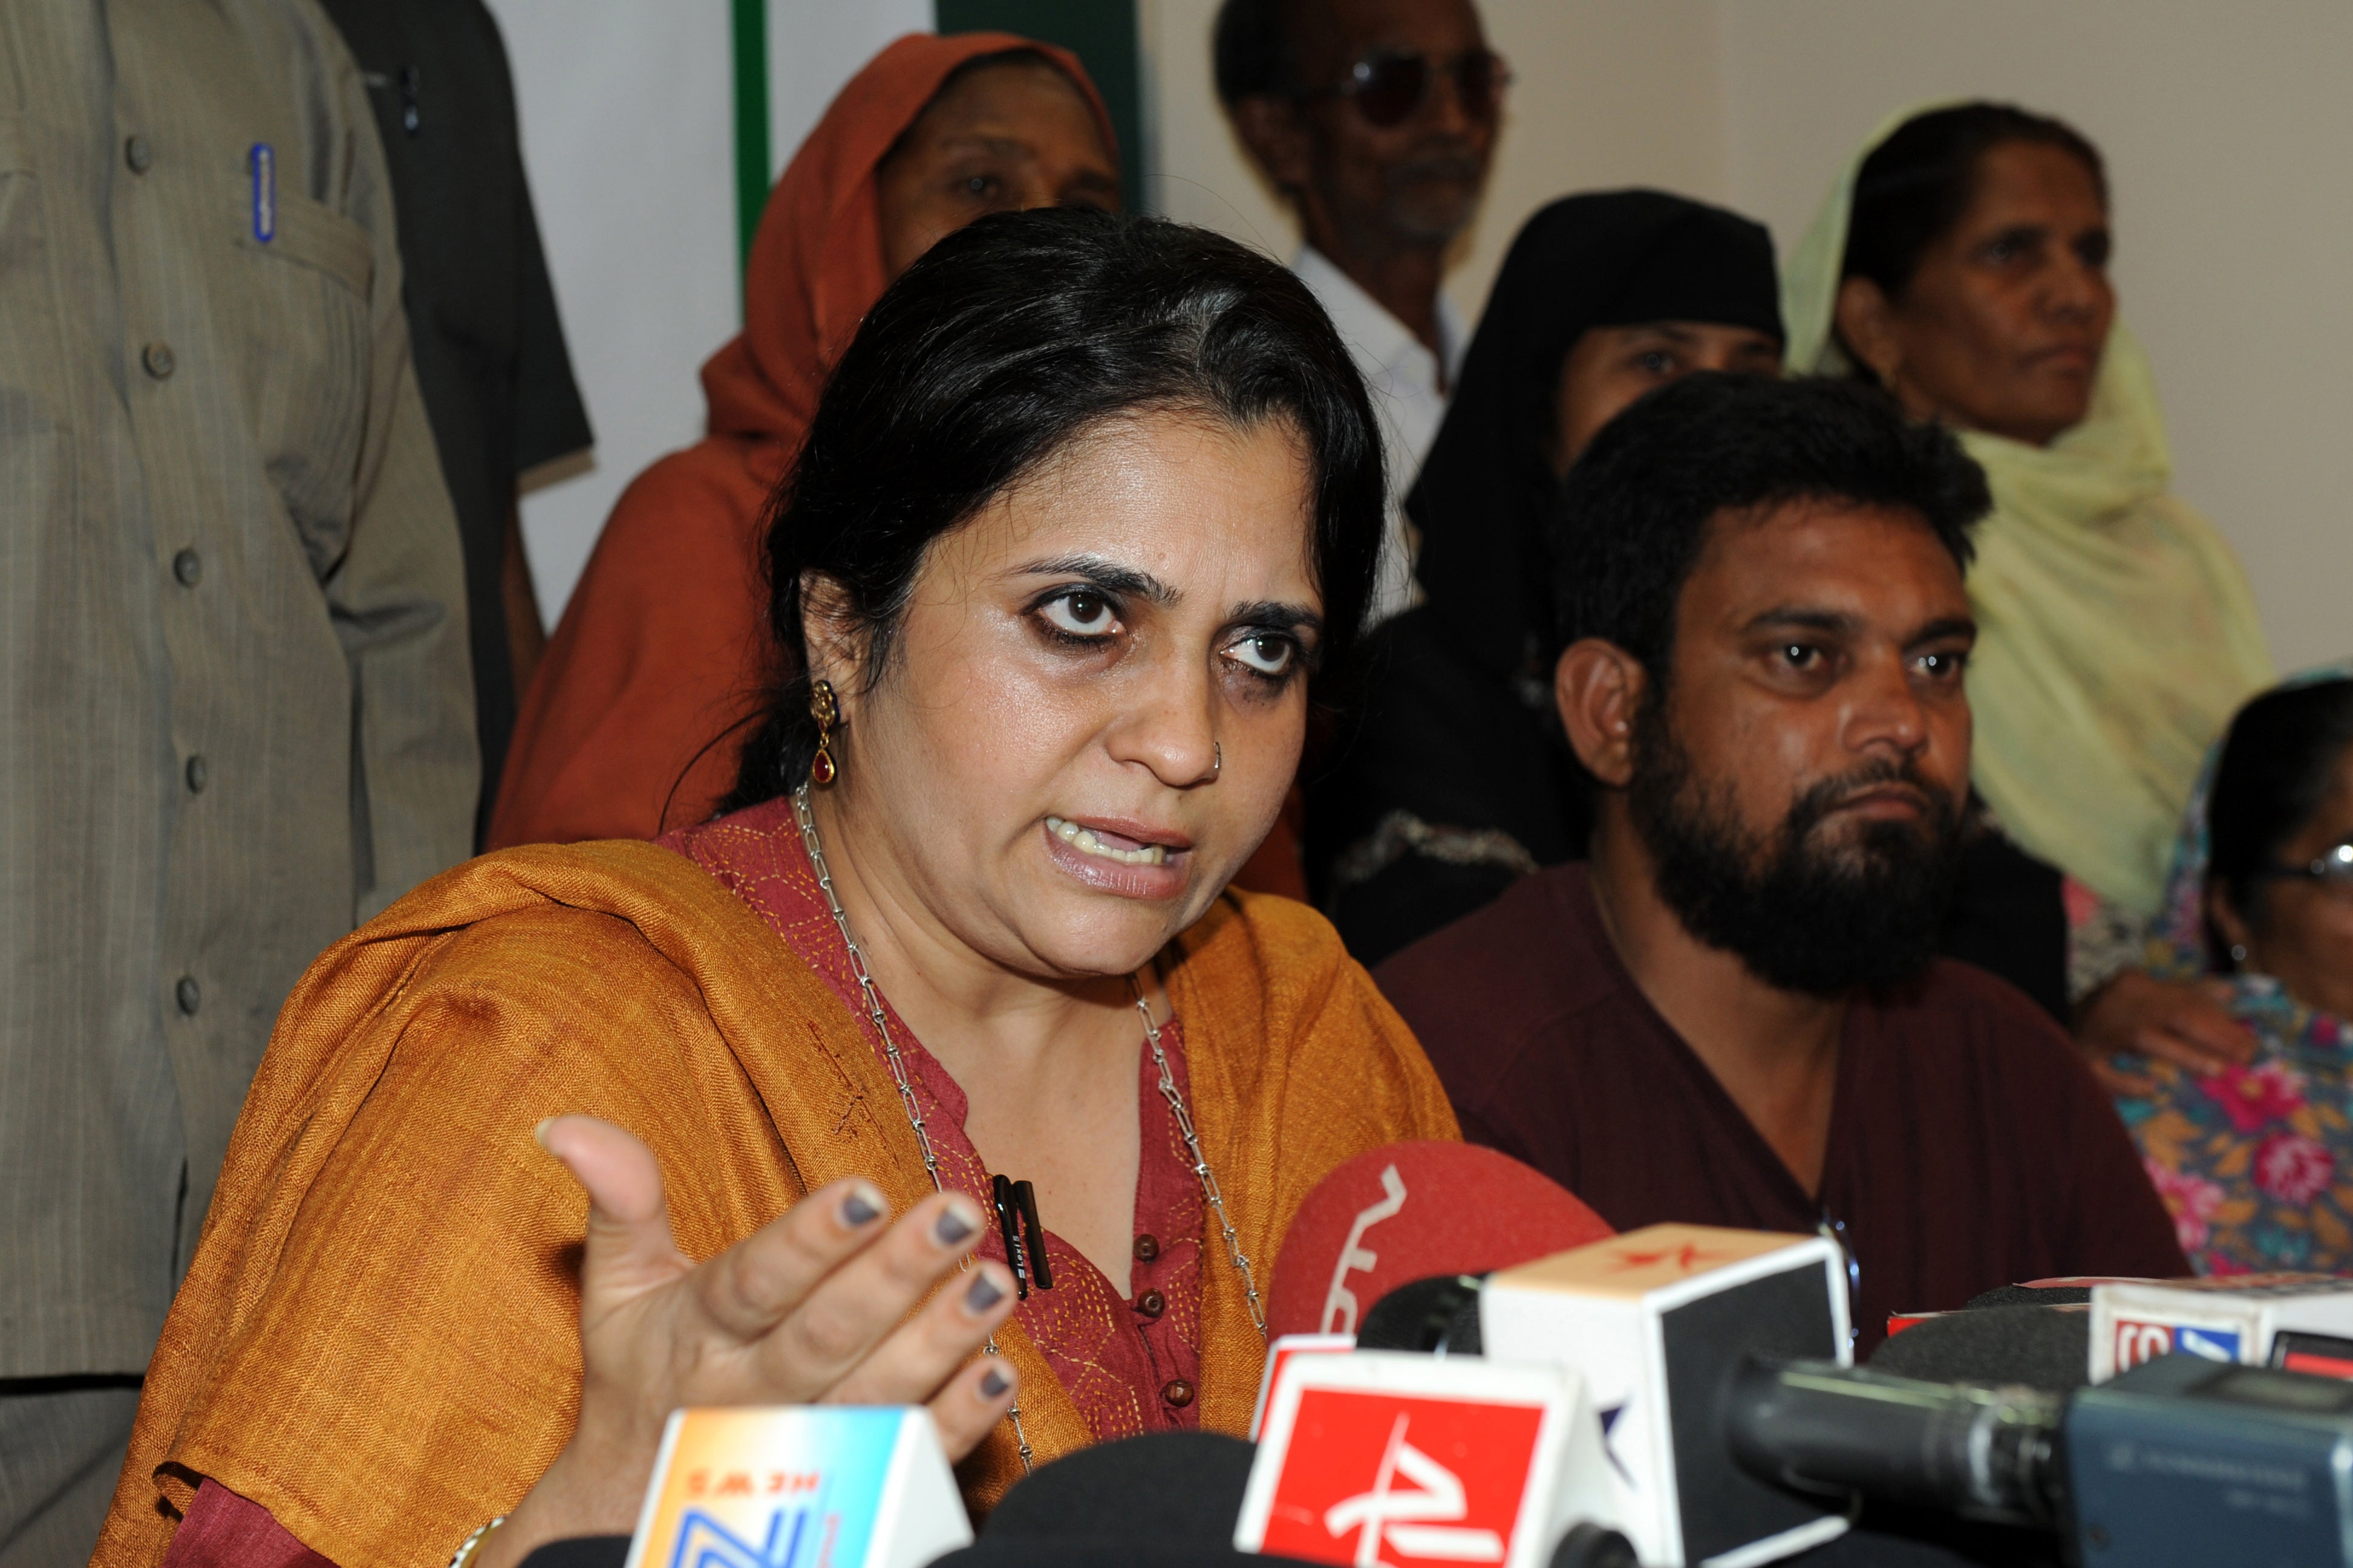 Teesta Setalvad, 60, faces several charges, including giving or fabricating false evidence, false charge of offence made to injure and forgery for the pupose of cheating